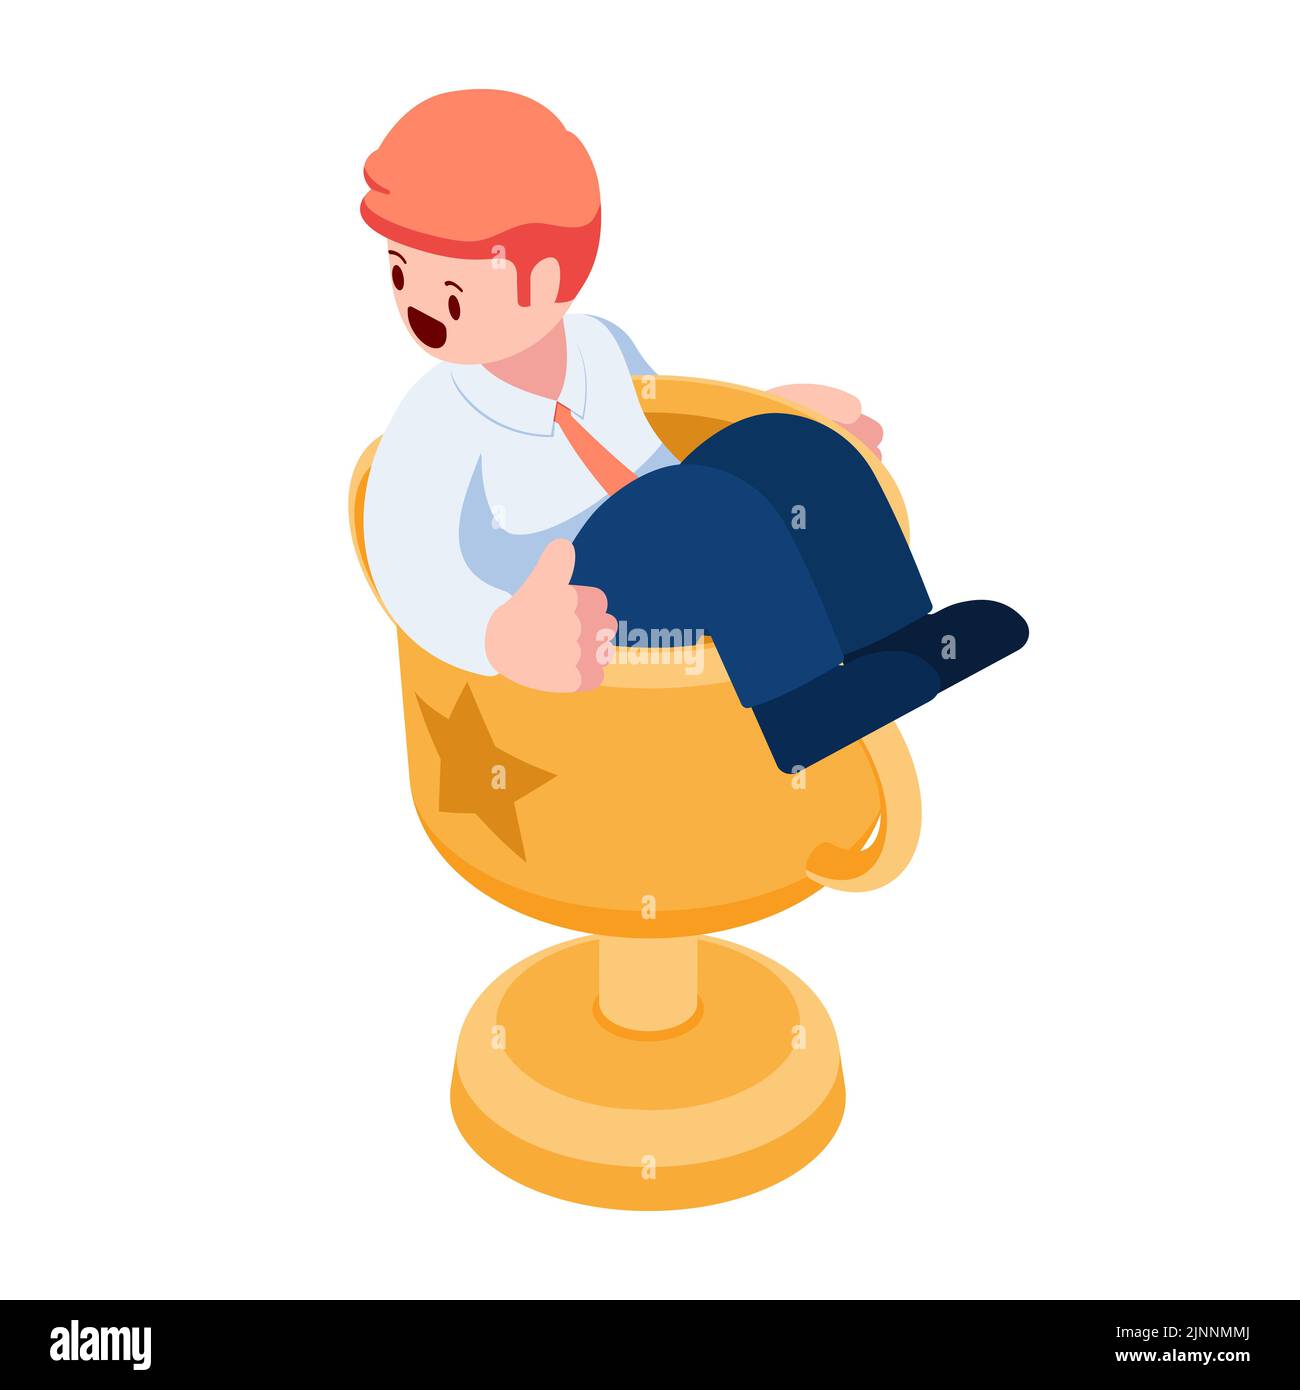 Flat 3d Isometric Businessman Showing Thumbs Up Inside Winner Trophy. Business Winner and Success Concept Stock Vector